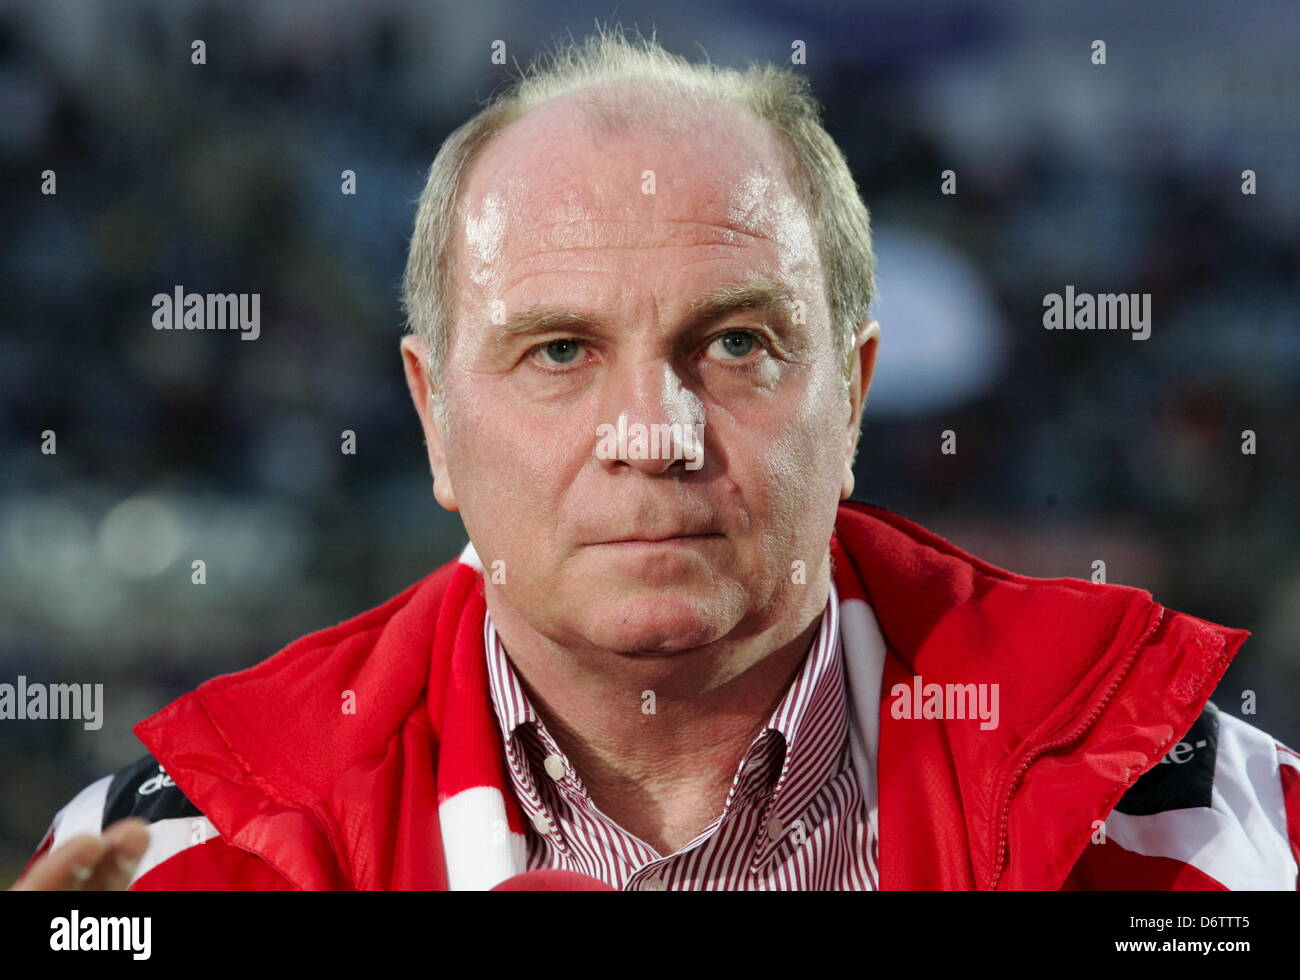 Munich's generral manager Uli Hoeness gives an interview after the UEFA Cup quarter-finals 2nd leg Getafe CF v FC Bayern Munich at Coliseum Alfonso Perez stadium in Madrid, Spain, 10 April 2008. The match ended in a 3-3 draw a.e.t. and 4-4 on aggregate with a weak Munich squad moving up to semi-finals due to having scored more away goals. Photo: Matthias Schrader Stock Photo